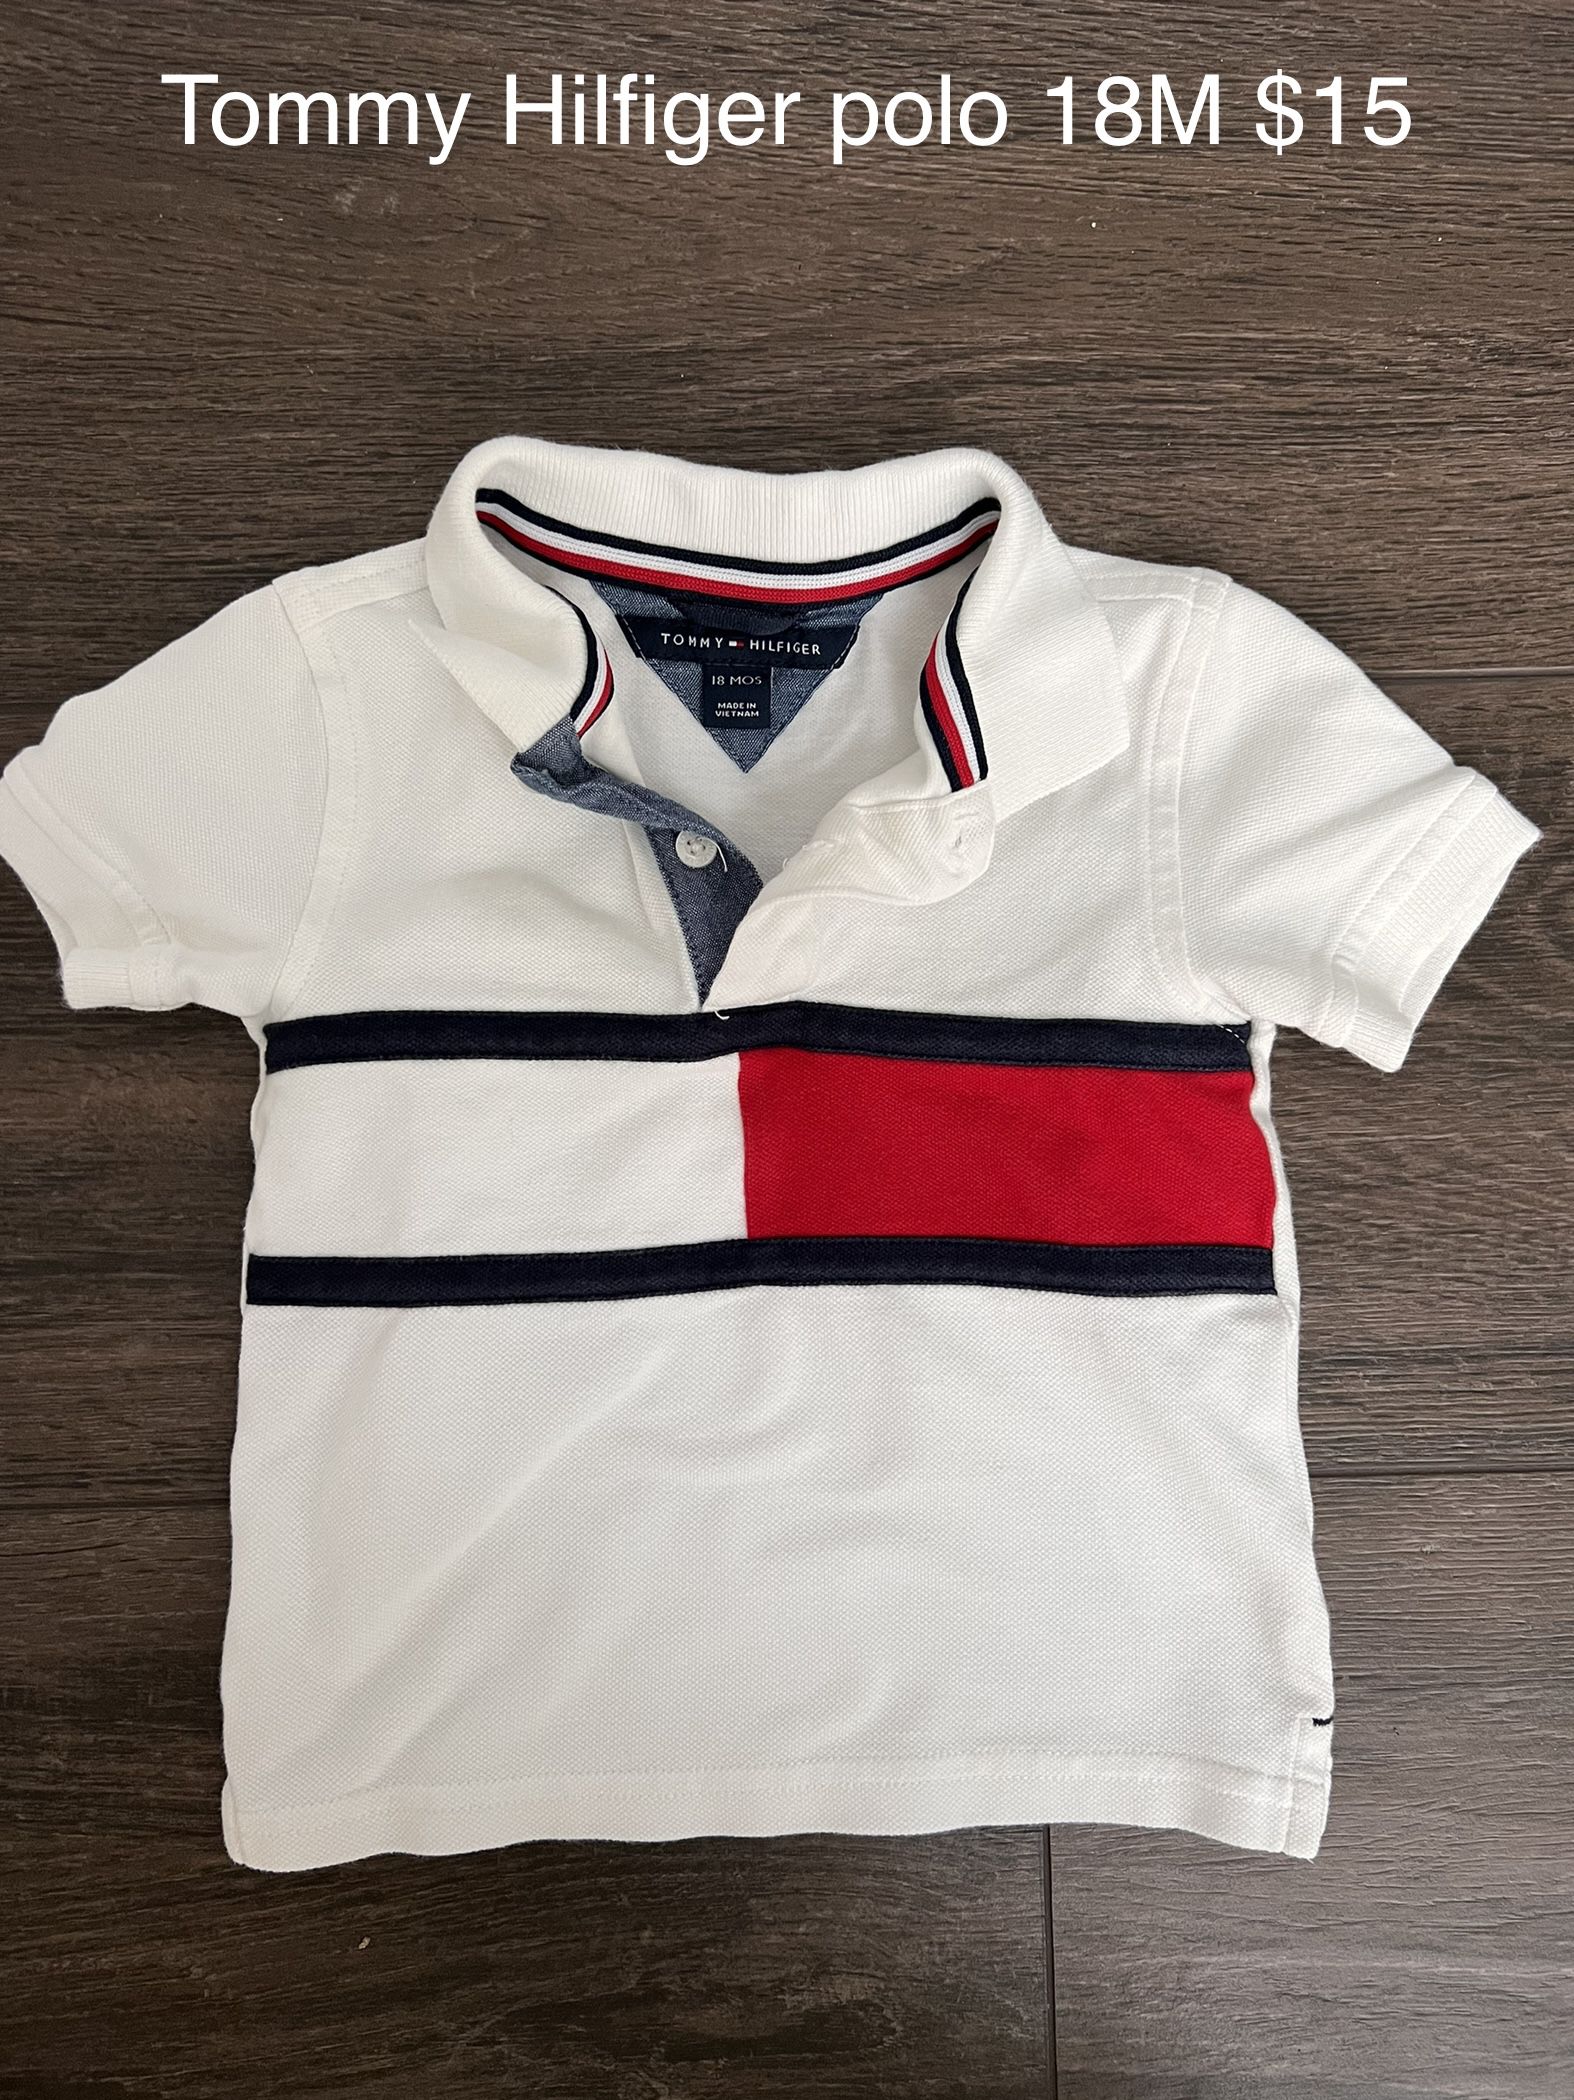 Baby Girl Clothes, Tommy Hilfiger Polo 18M for Sale in Delray Beach, FL - OfferUp